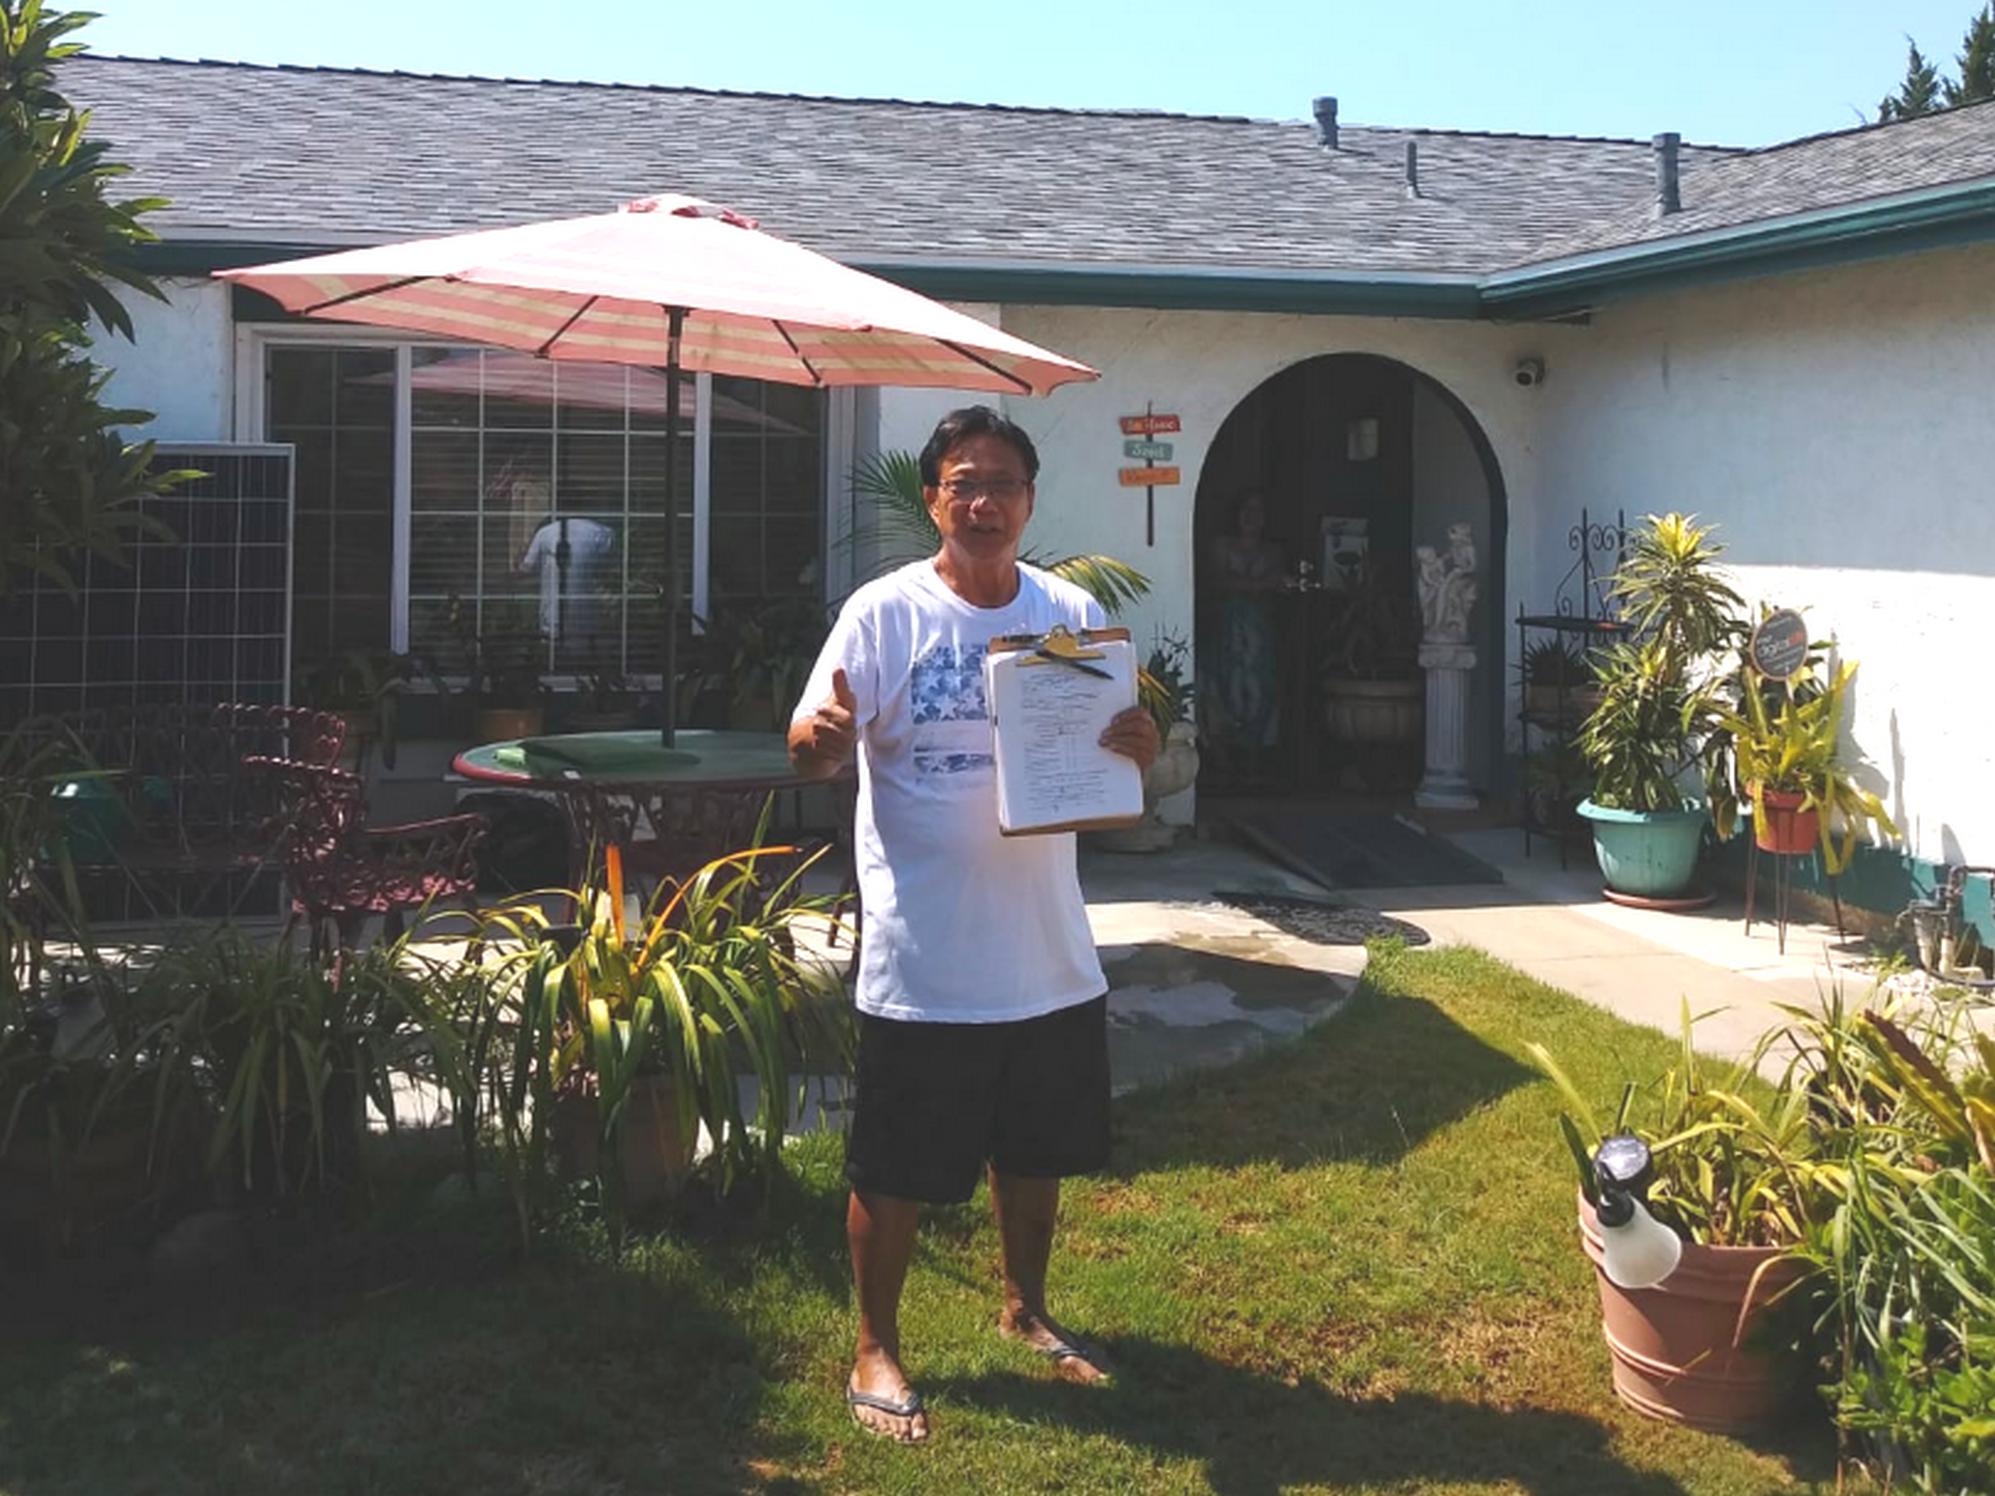 Genesis Home Improvements just finished a roof replacement project for the Villamayor family in San Diego